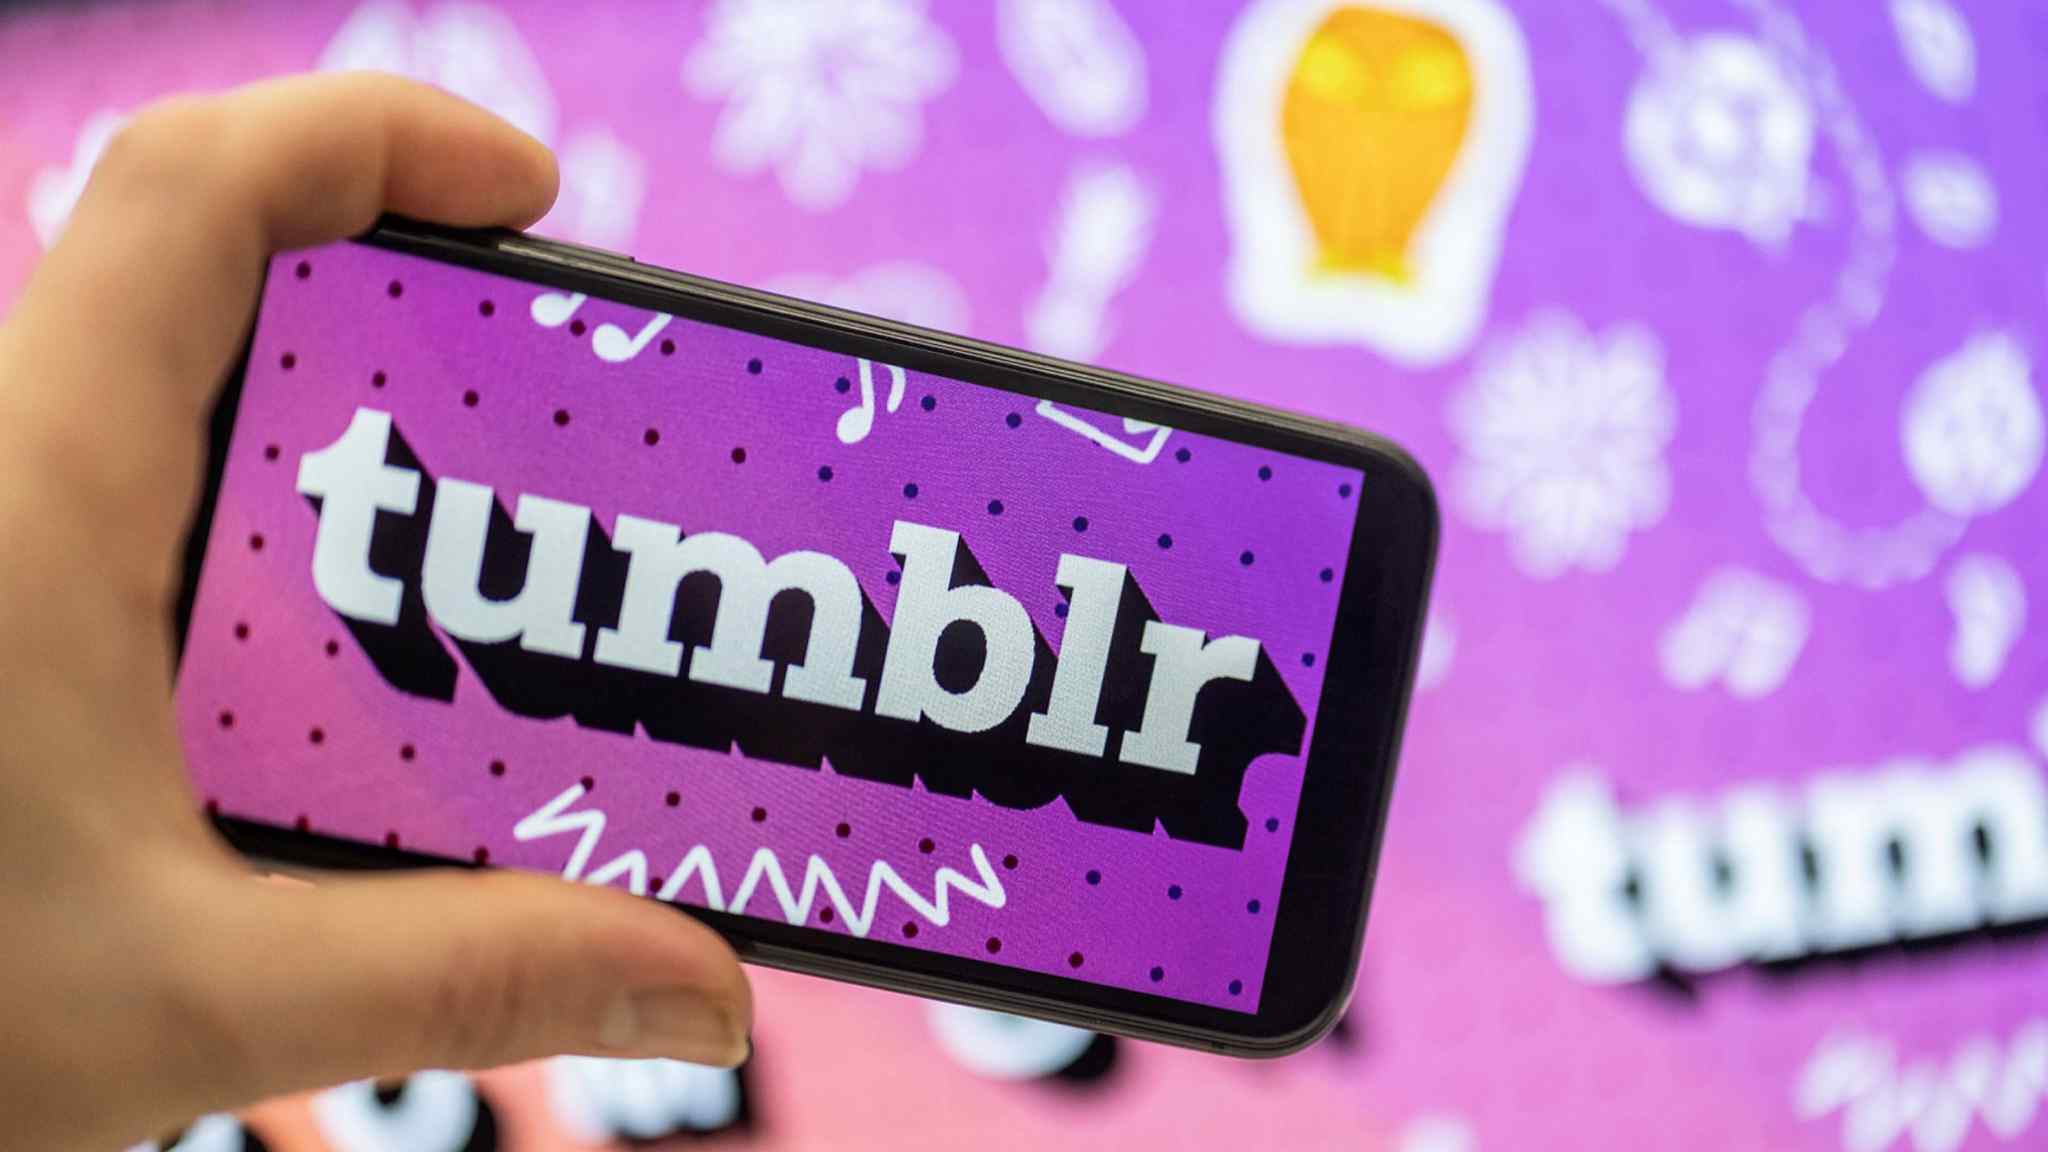 Tumblr picks itself up again after years of struggle 